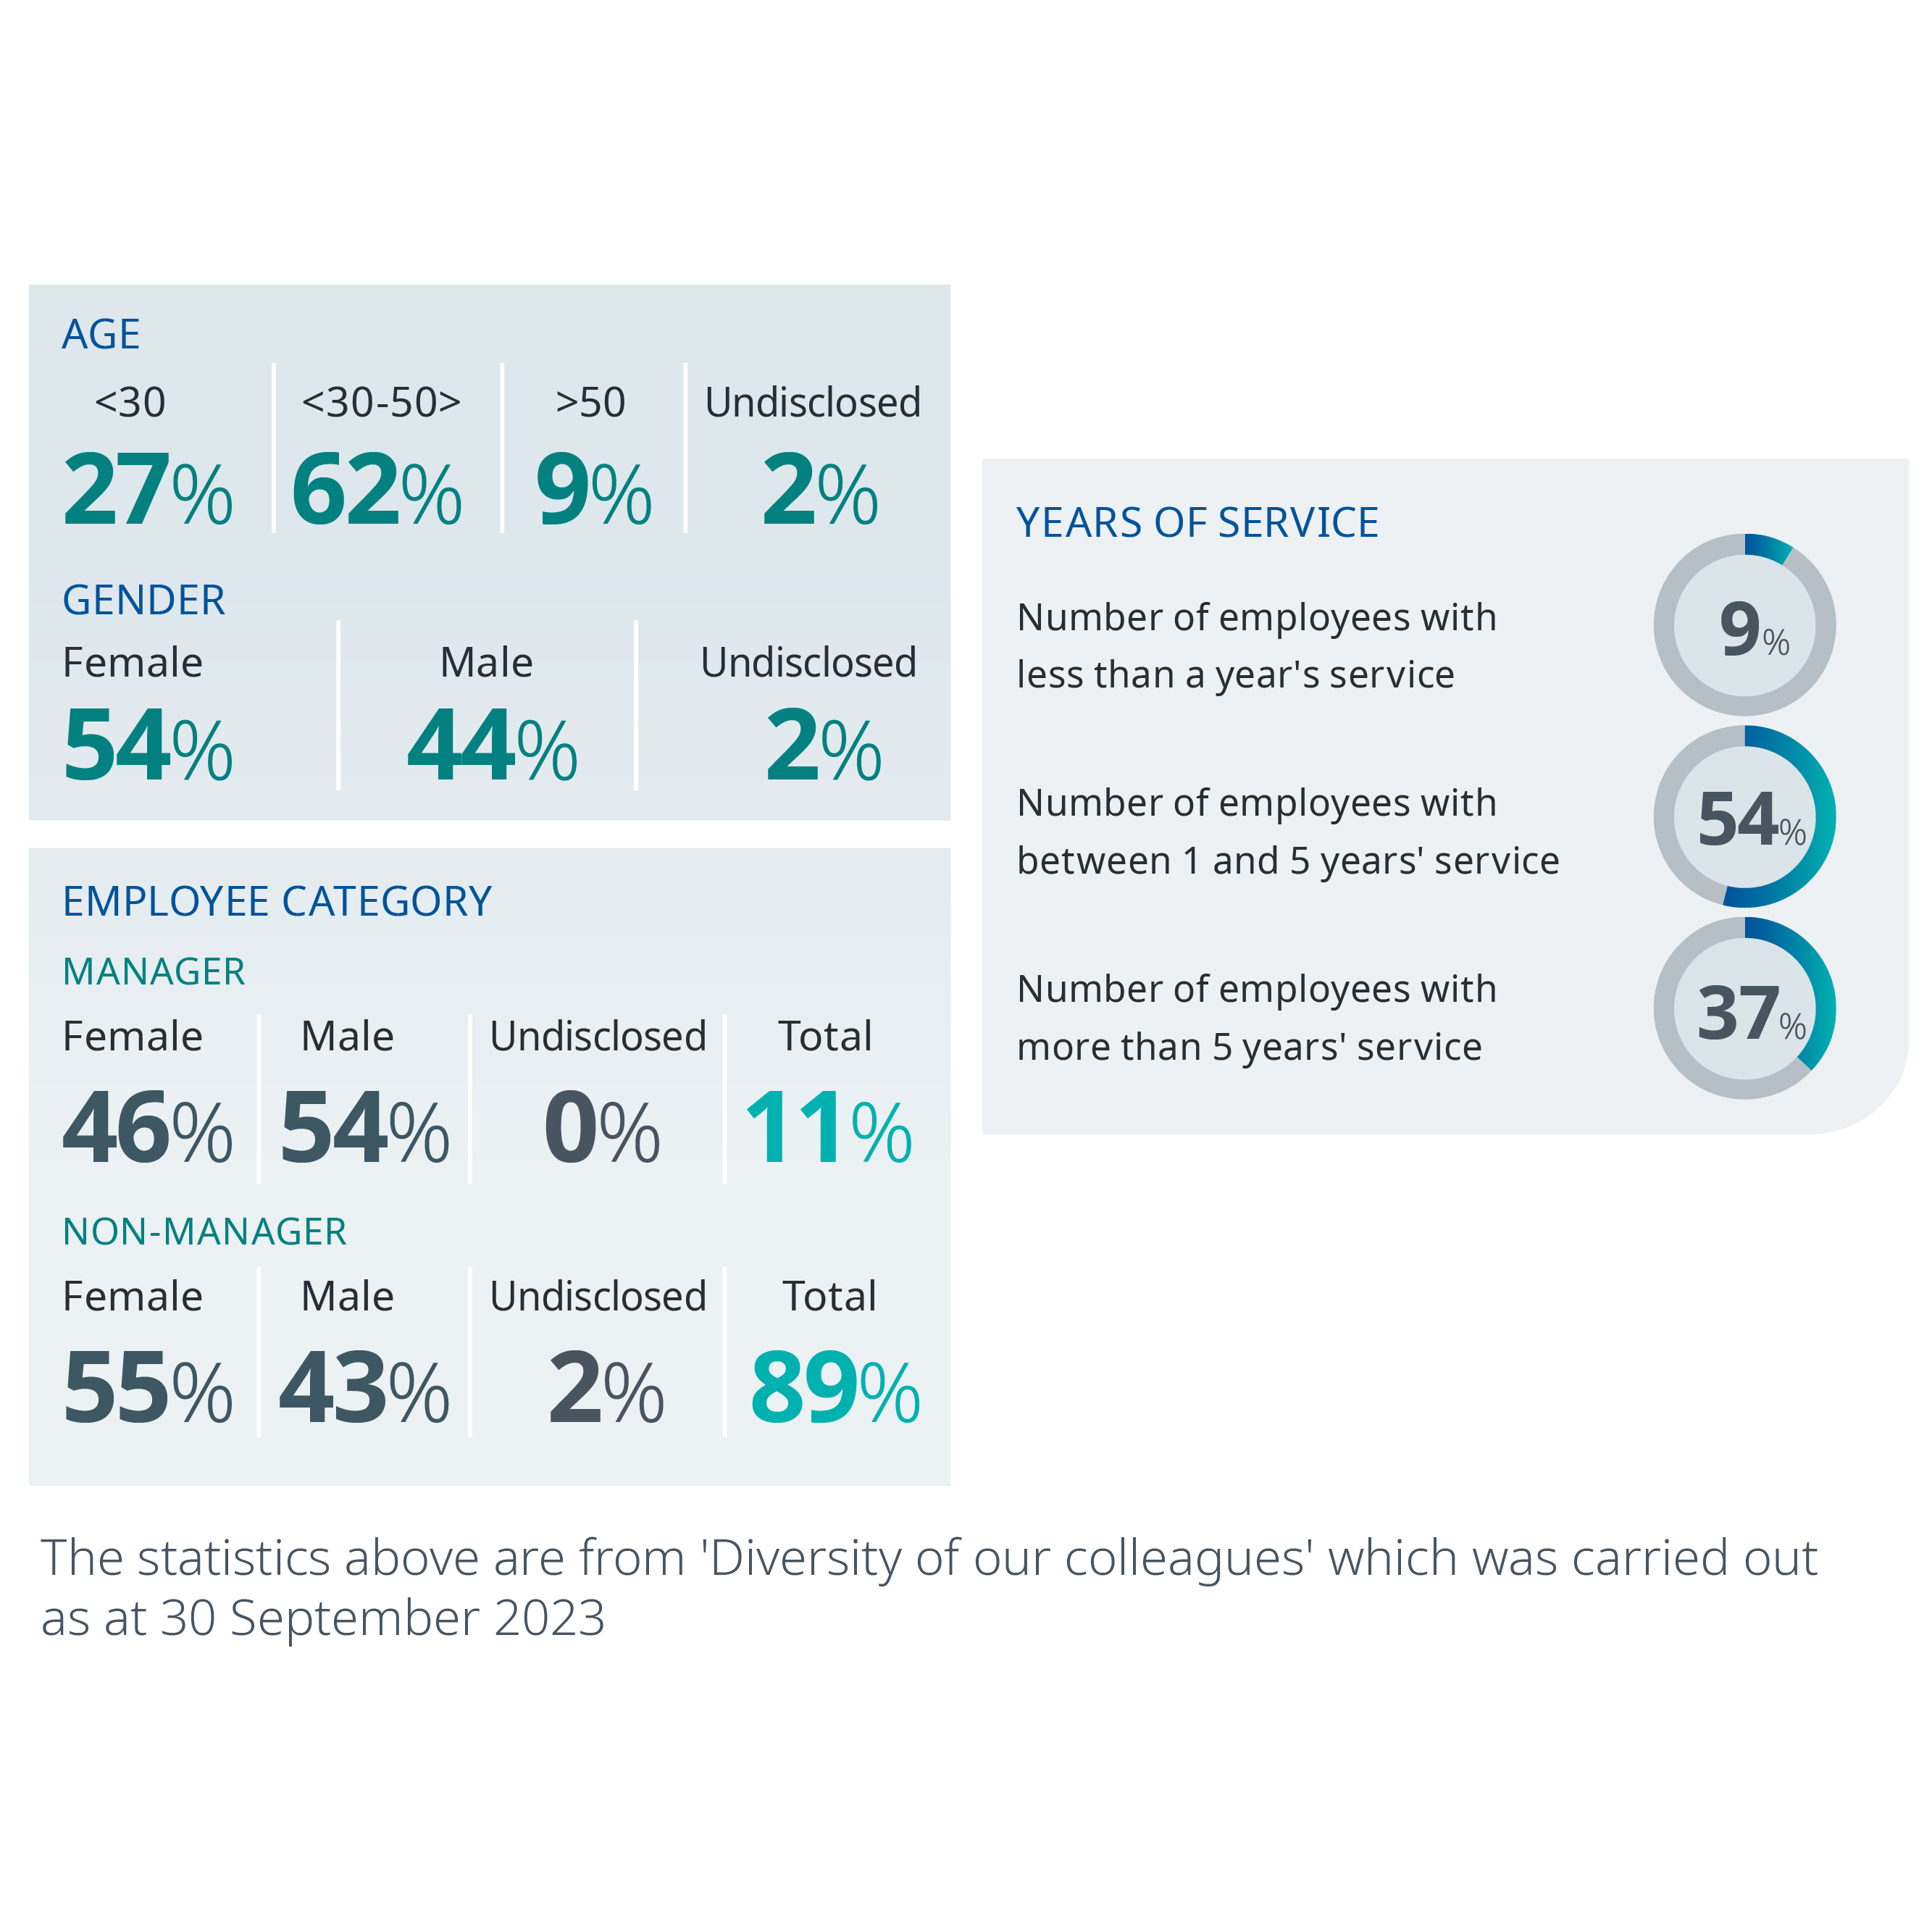 Screenshot from ESG report showing statistics from RWS diversity of our colleagues survey. Statistics are in relation to age, gender, employee category and length of service. 